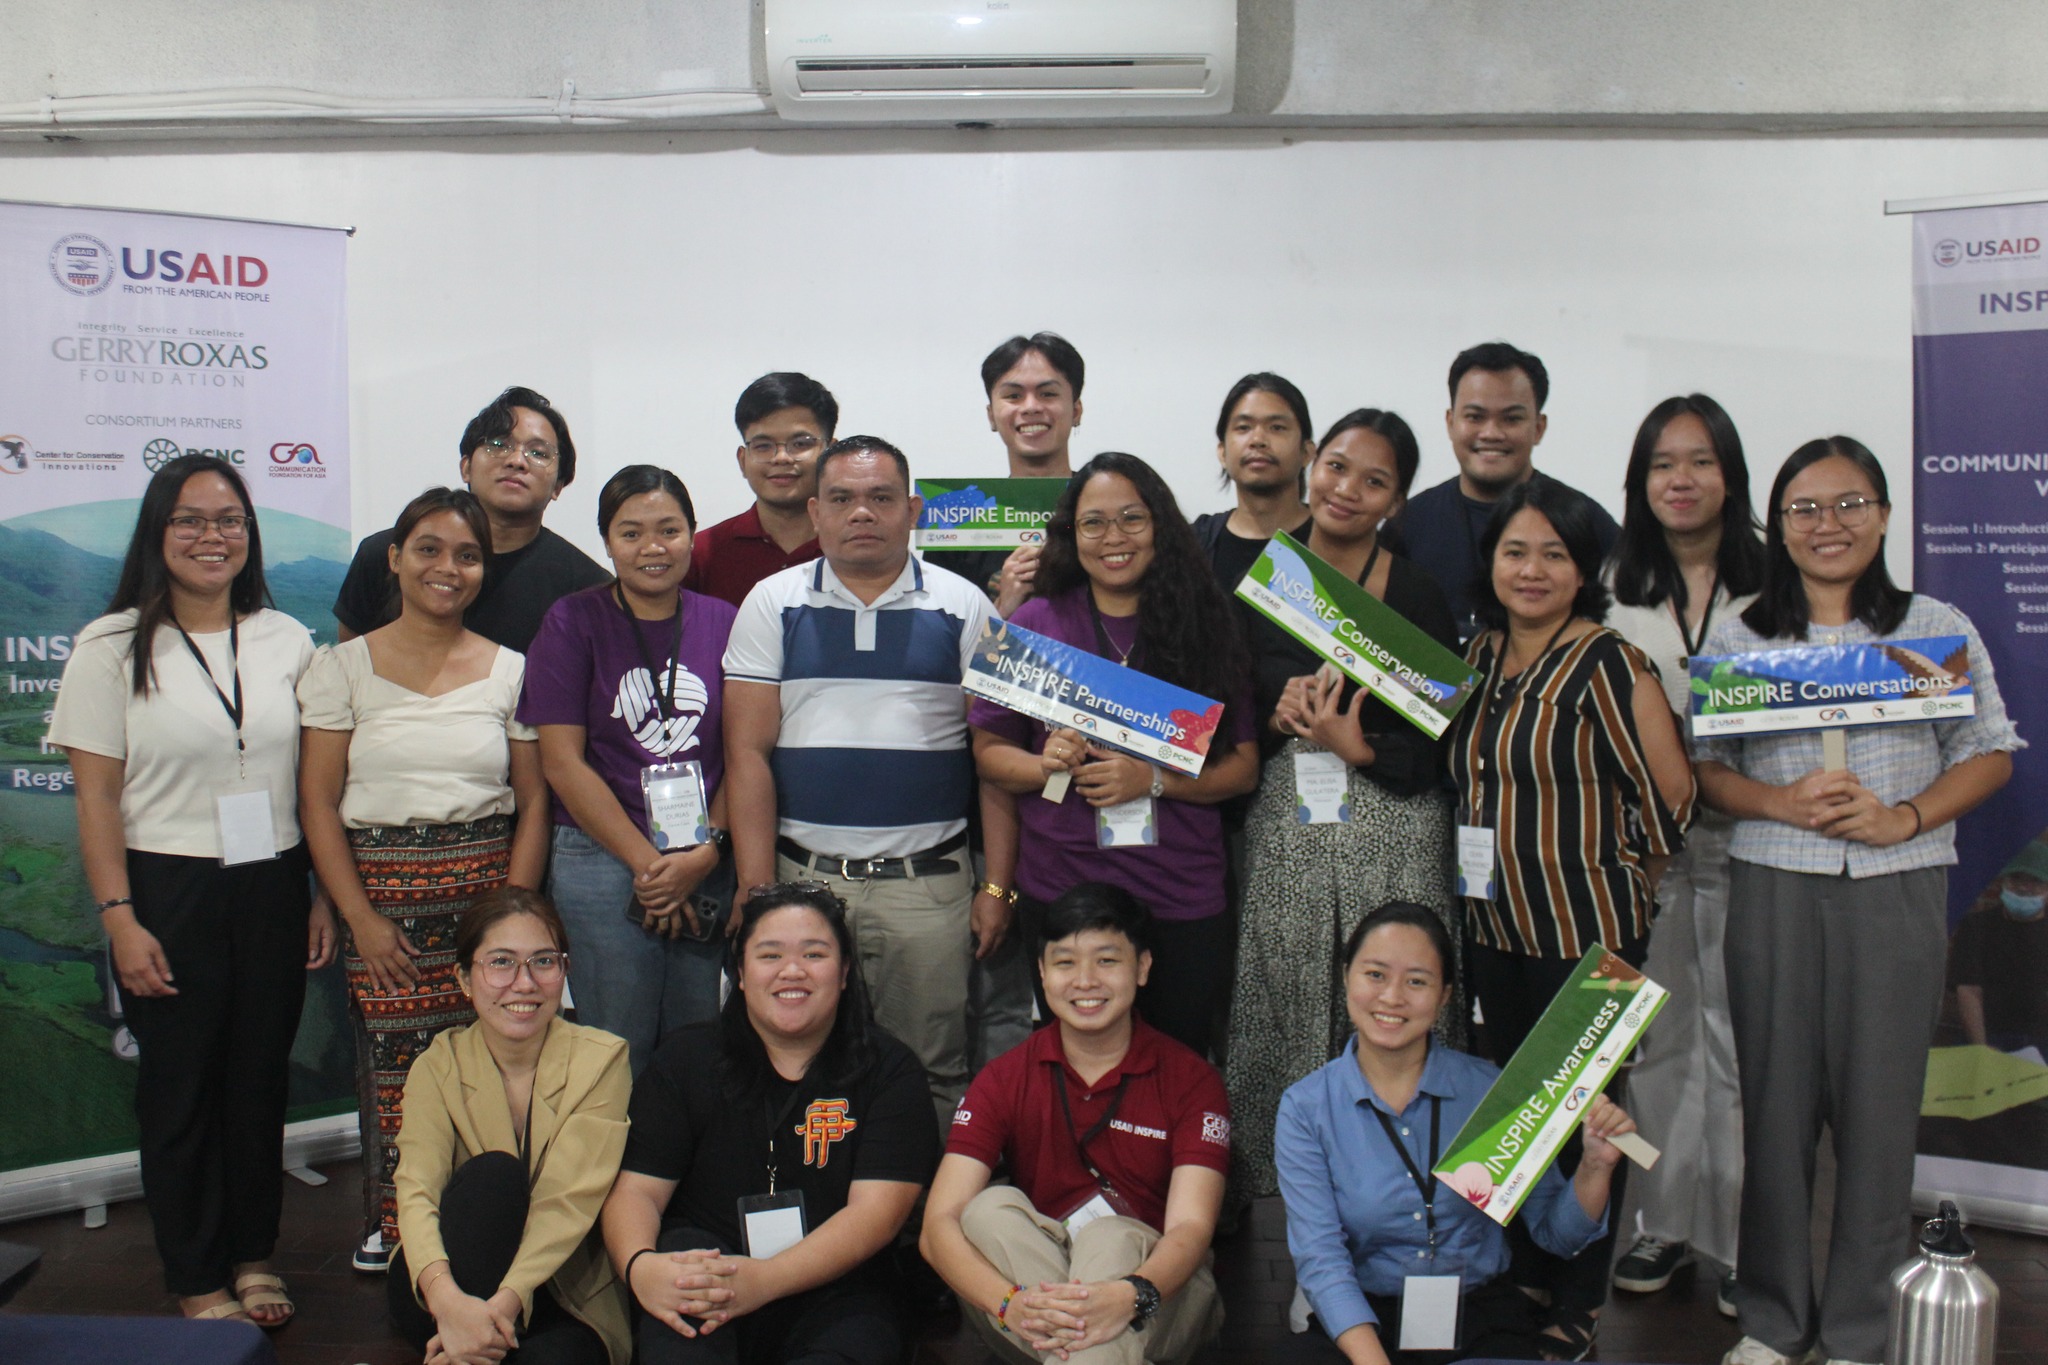 CCEF Communications for Development Team successfully completed the Communication Foundation for Asia’s Communications Training and Workshop for RC2 grantees